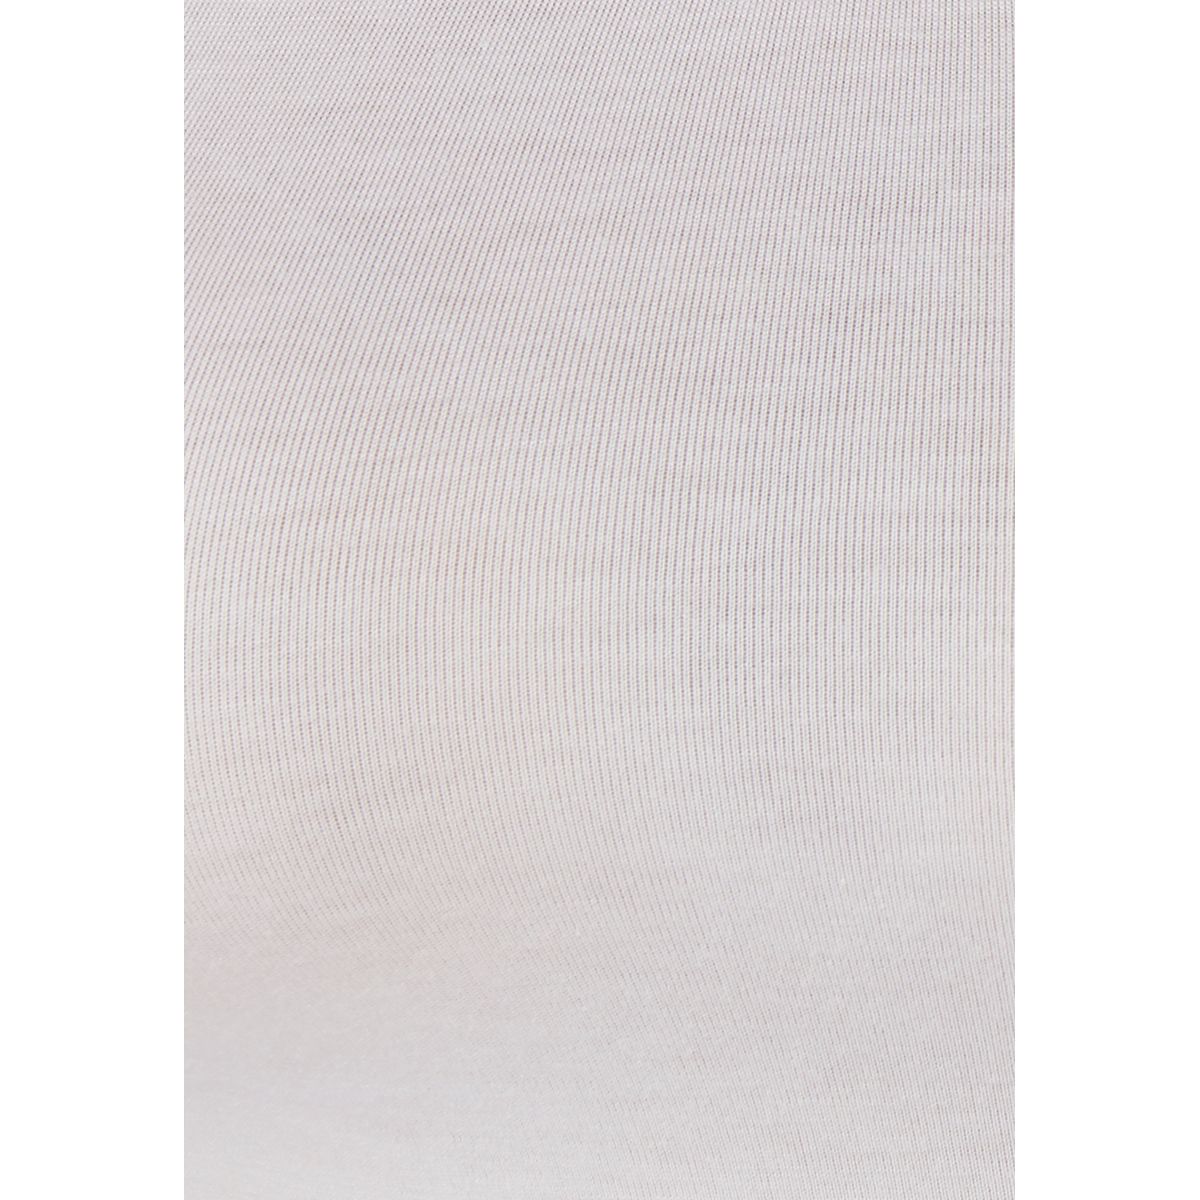 Tee-shirt manches courtes microfibre, effet relaxant Thermolactyl